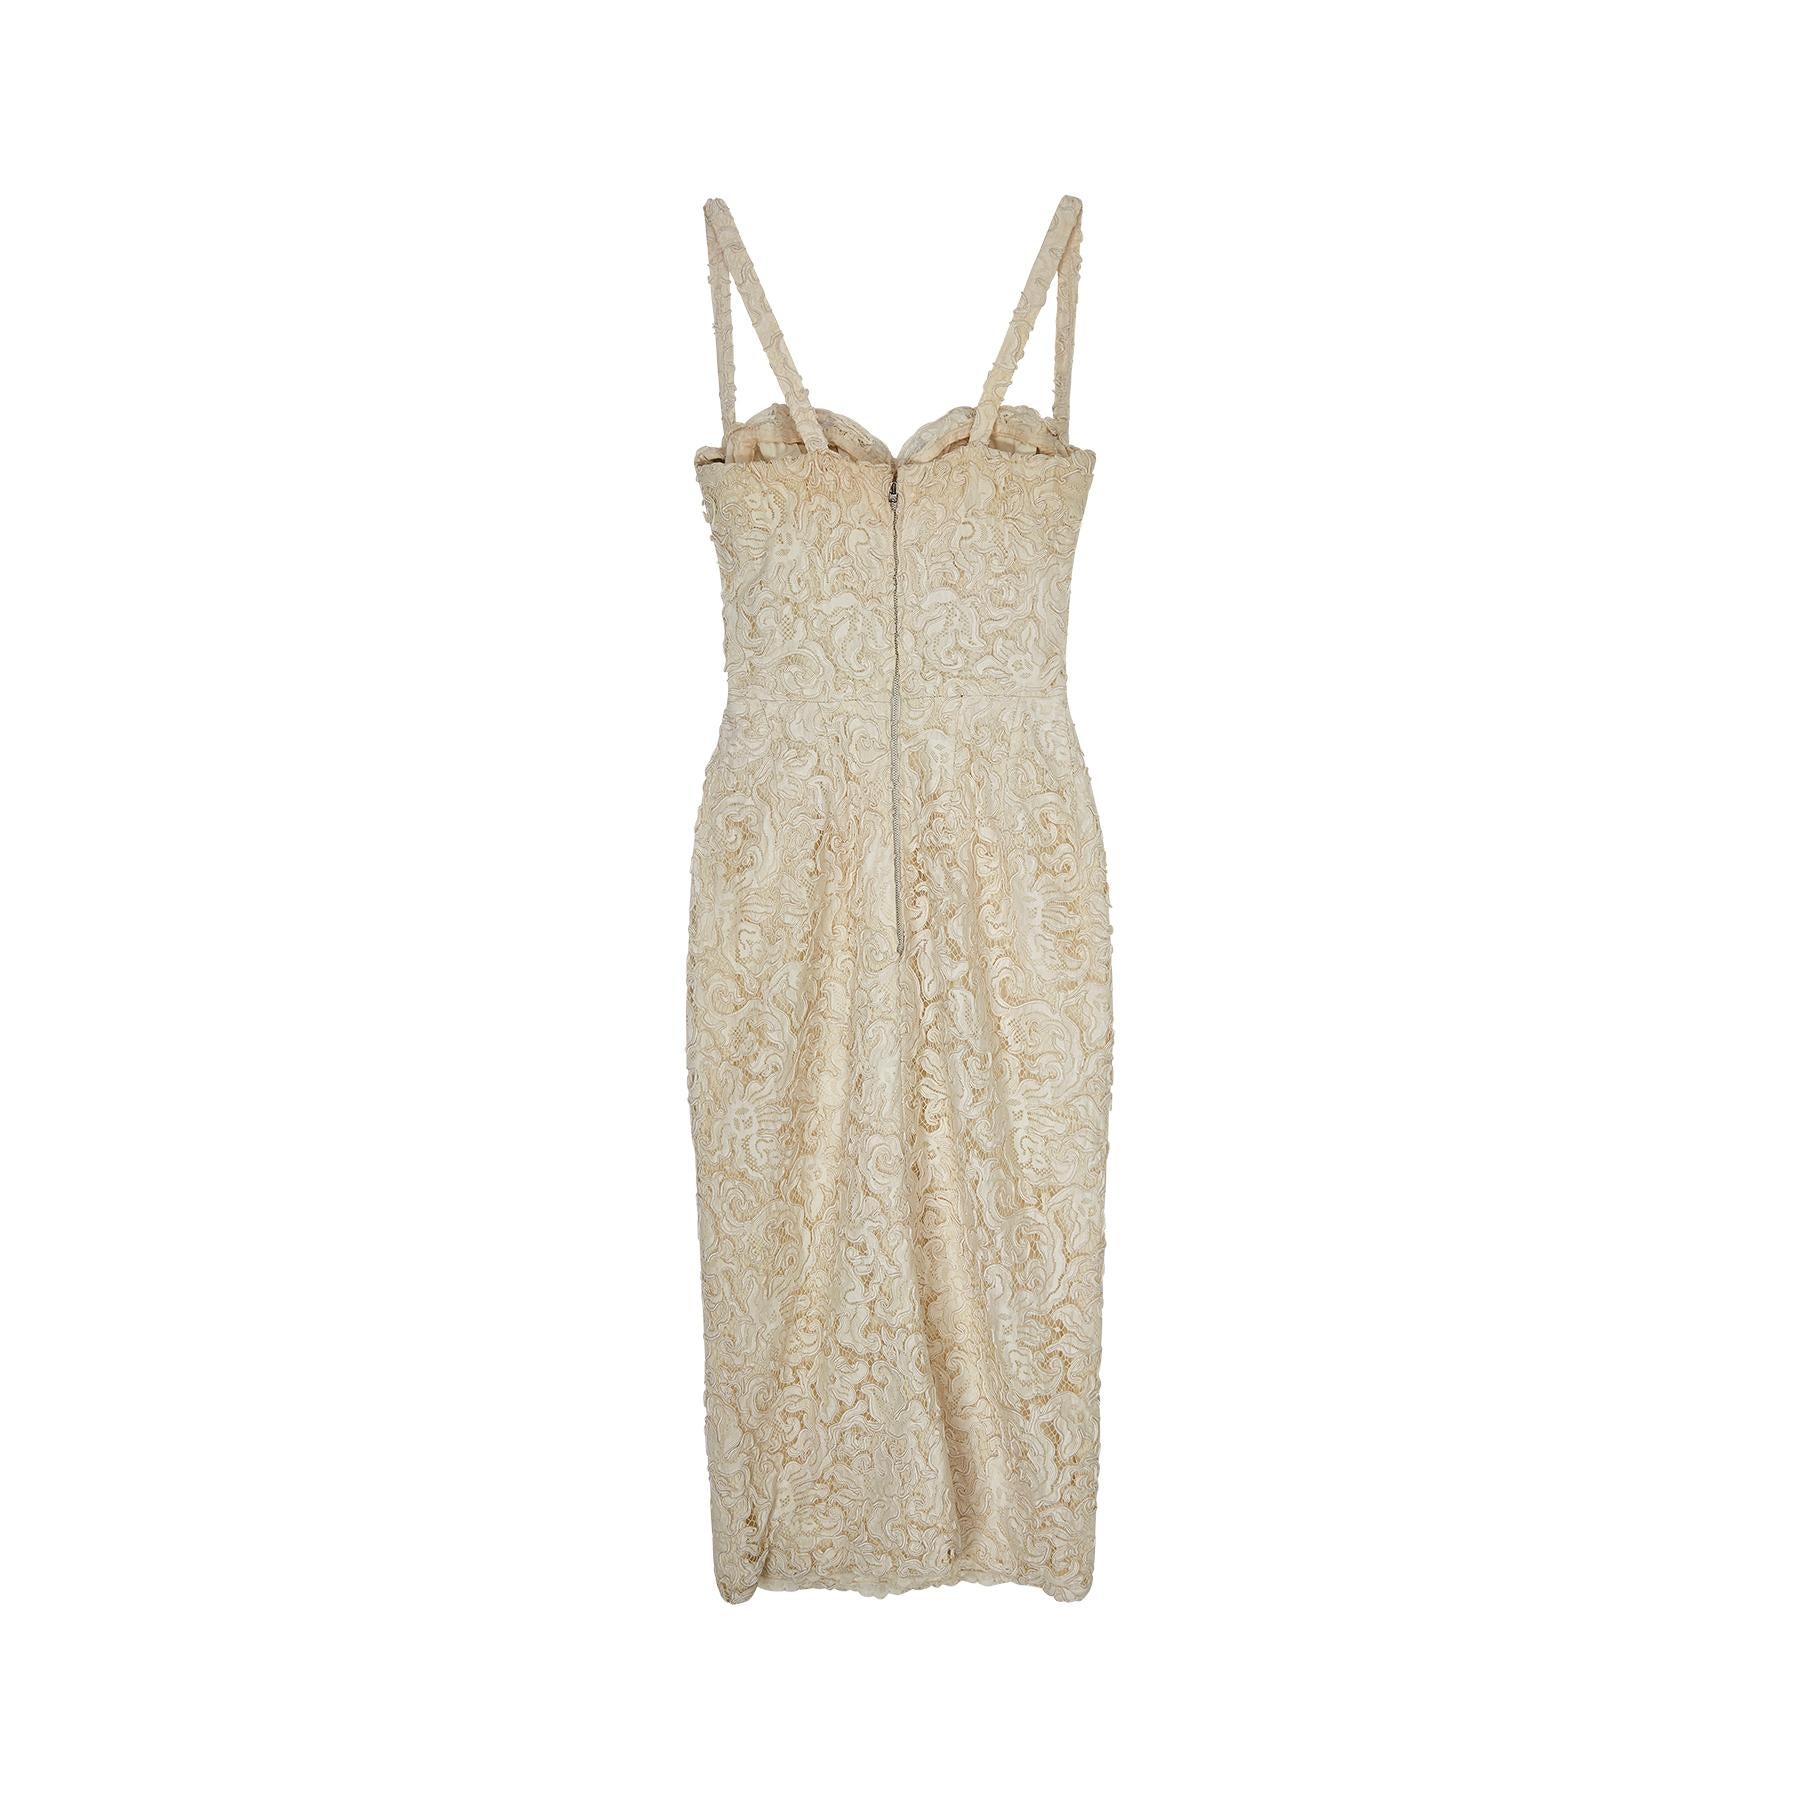 Beige 1950s French Haute Couture Cream Lace Bustier Dress For Sale